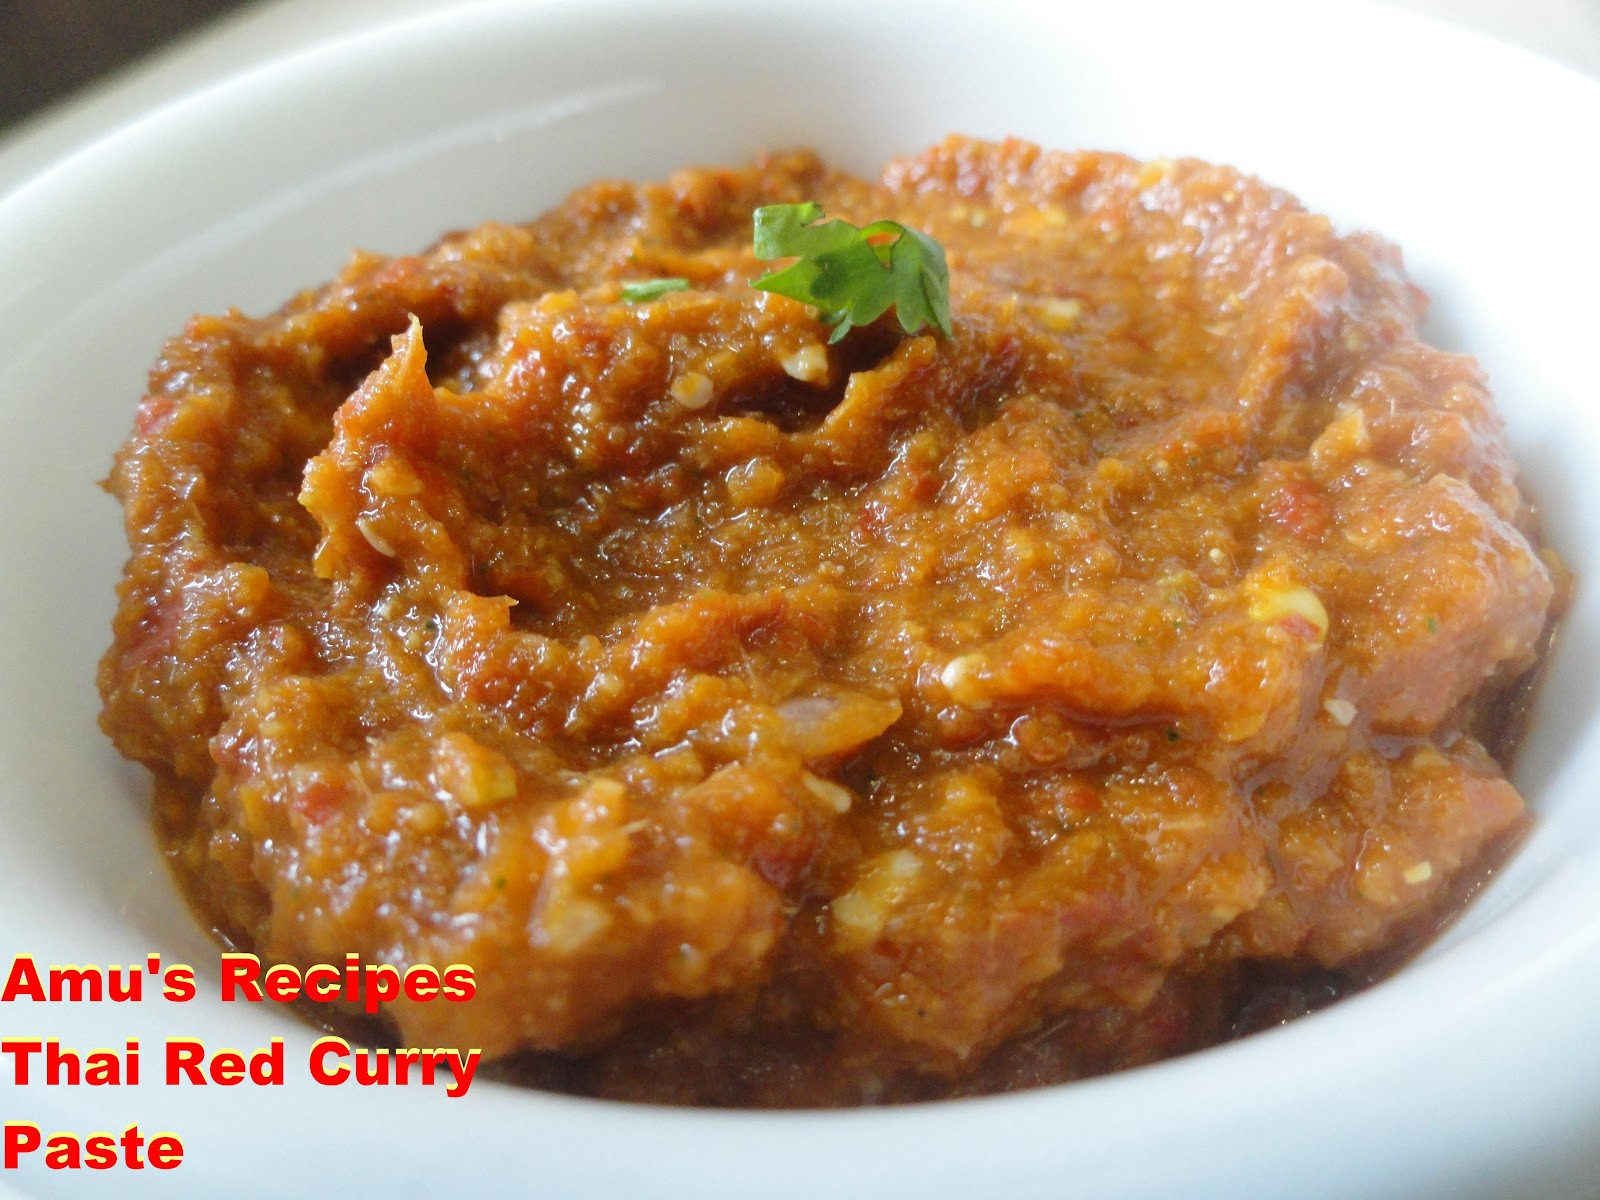 Thai Red Curry Sauce Recipes
 AMU S RECIPES Thai Red Curry Paste